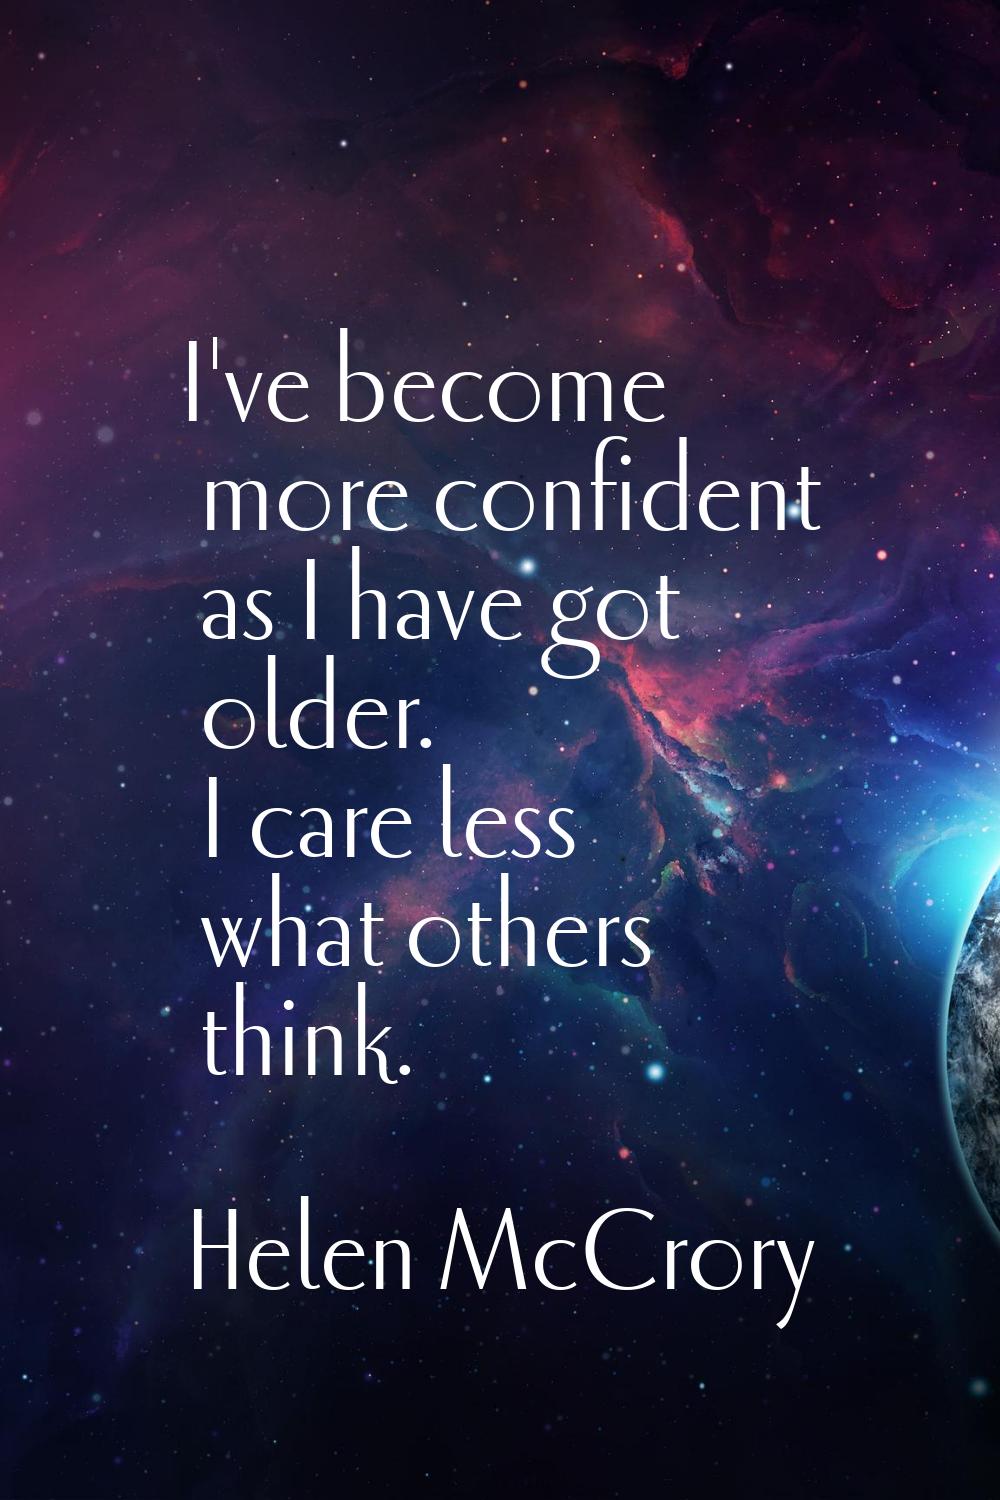 I've become more confident as I have got older. I care less what others think.